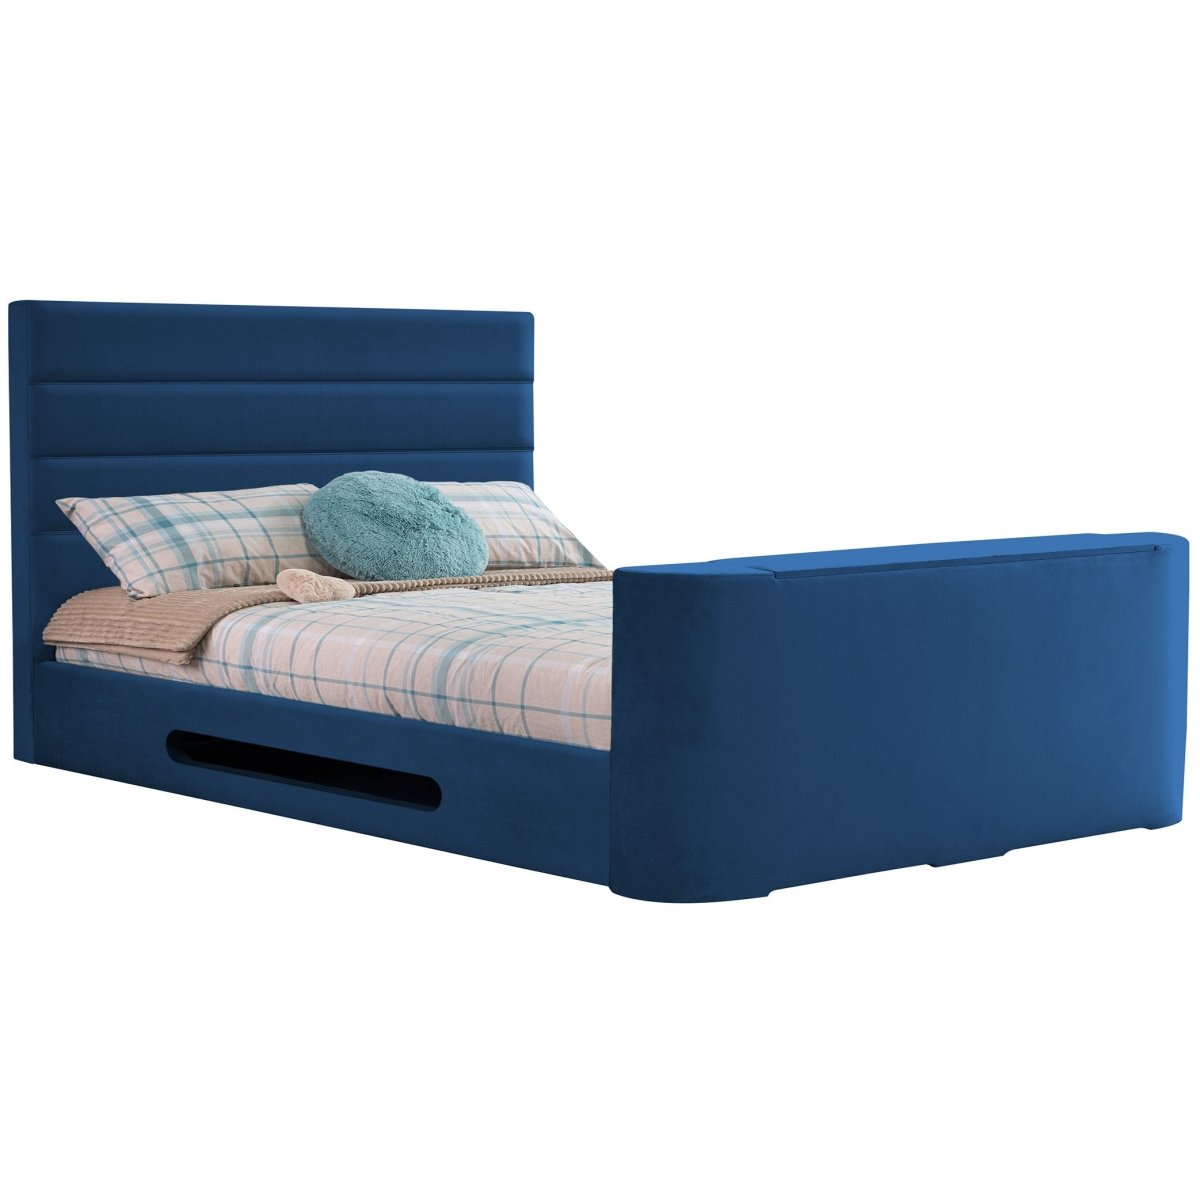 Mazarine Standard TV Bed frame - TV Beds Northwest - INMAZ-STD-135-CHATS GRANITE - choose your colour tvbed - doubletvbed